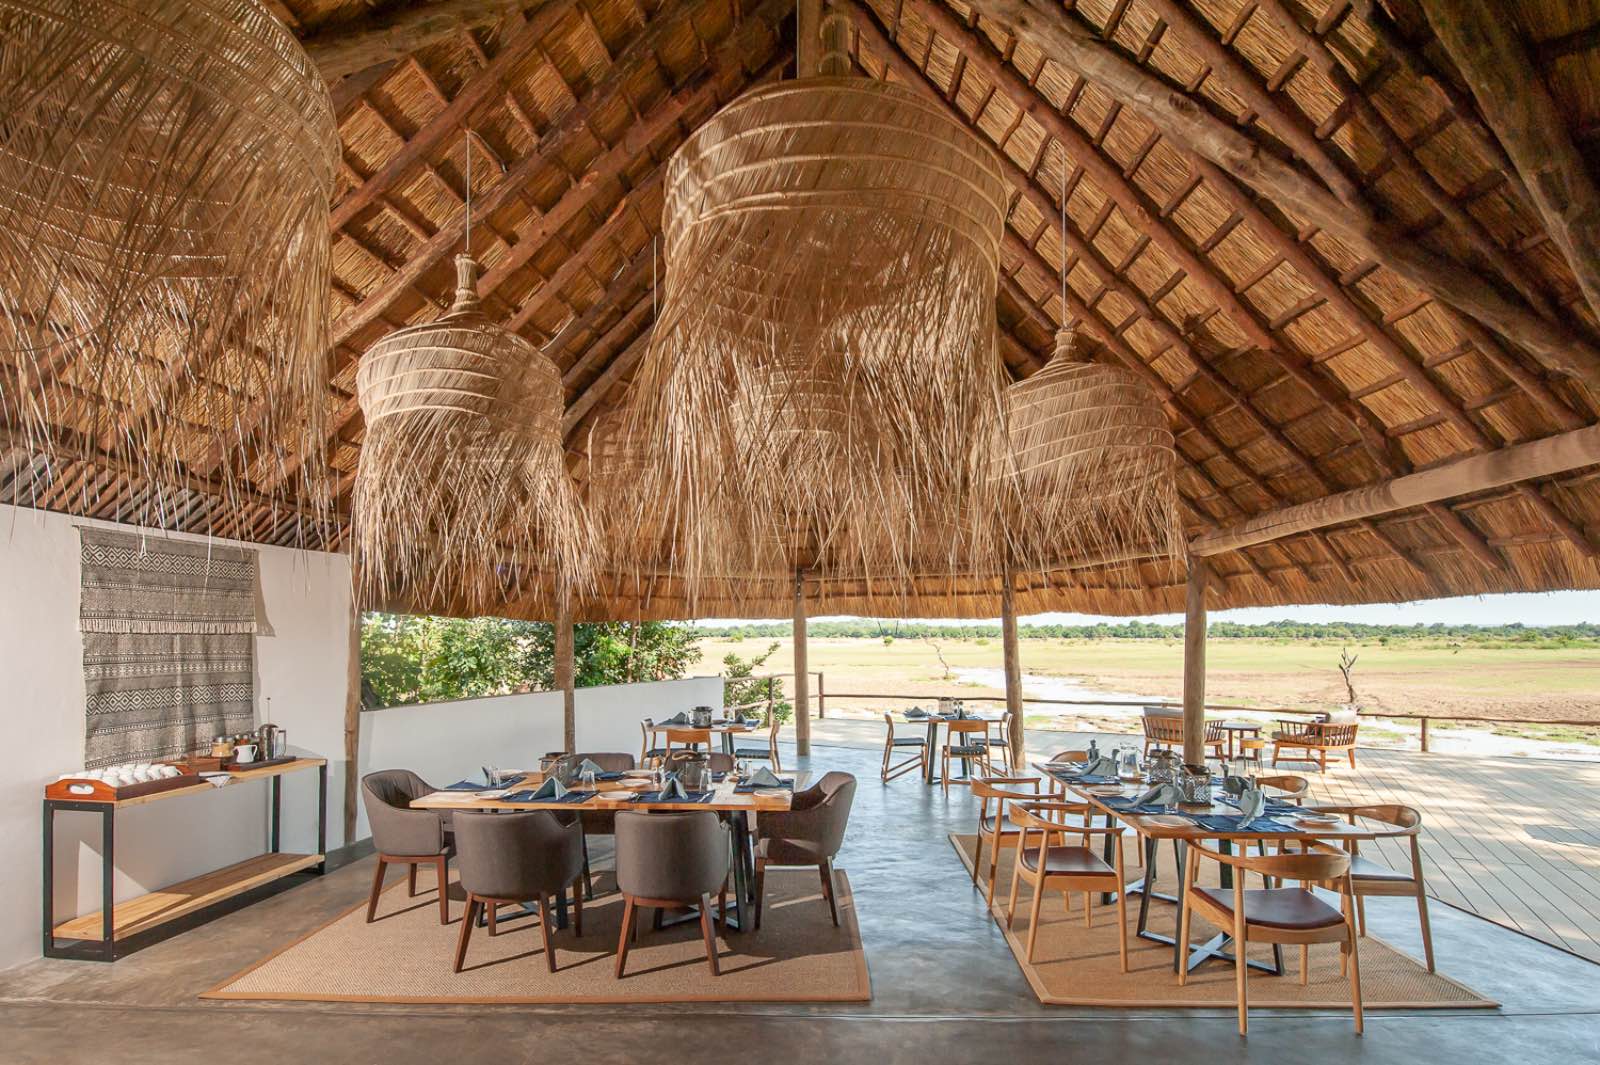 A dining area under thatch with soft furnishings and African accents